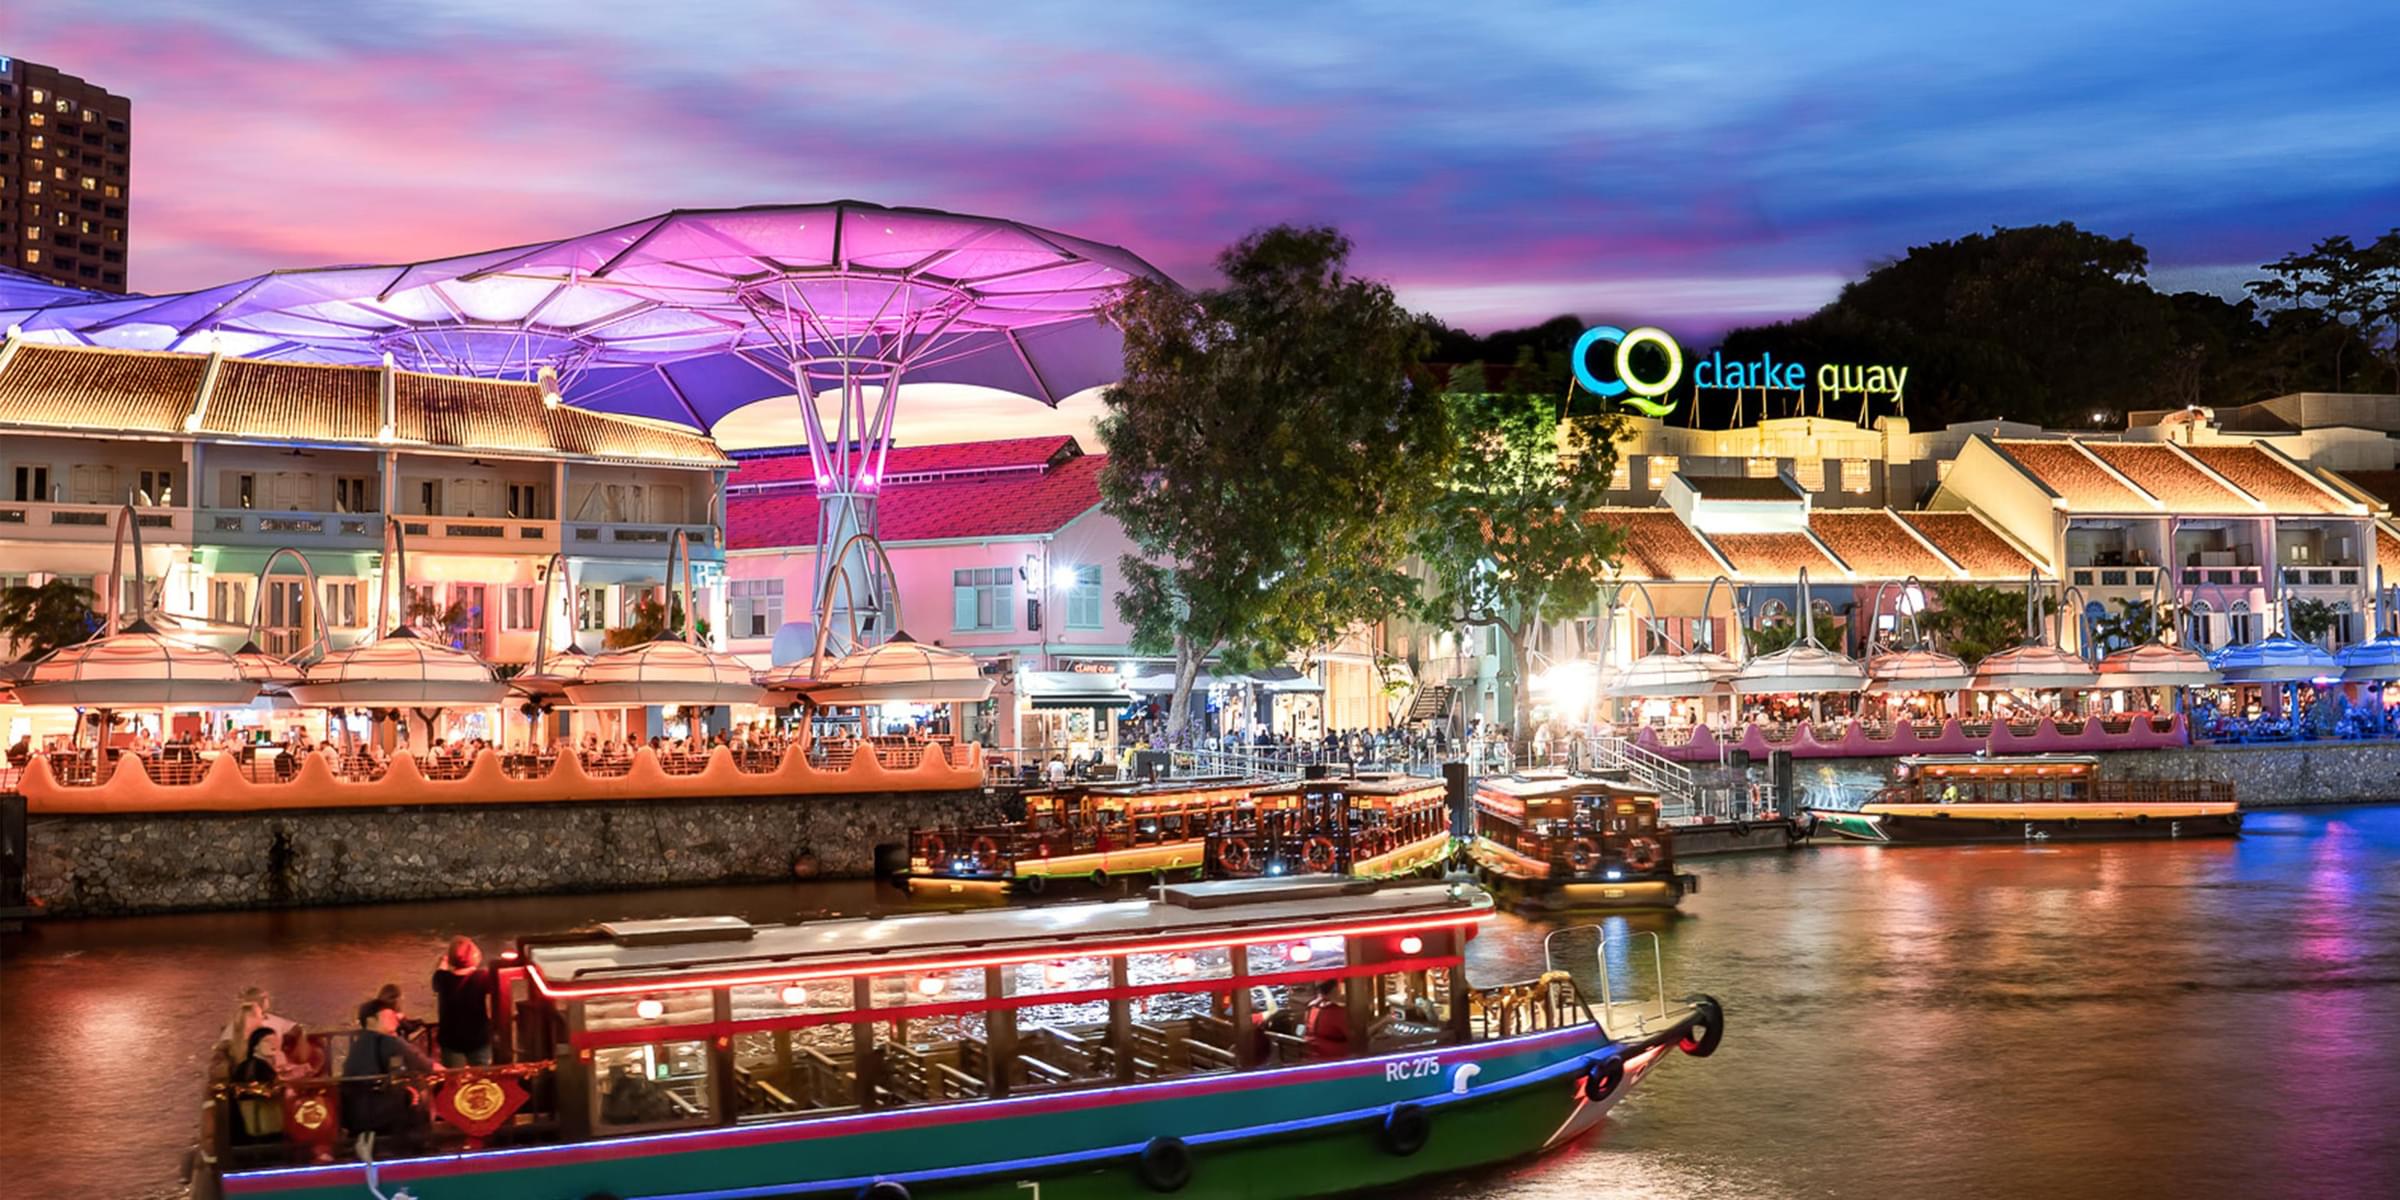 Magnificent view of the Clark Quay